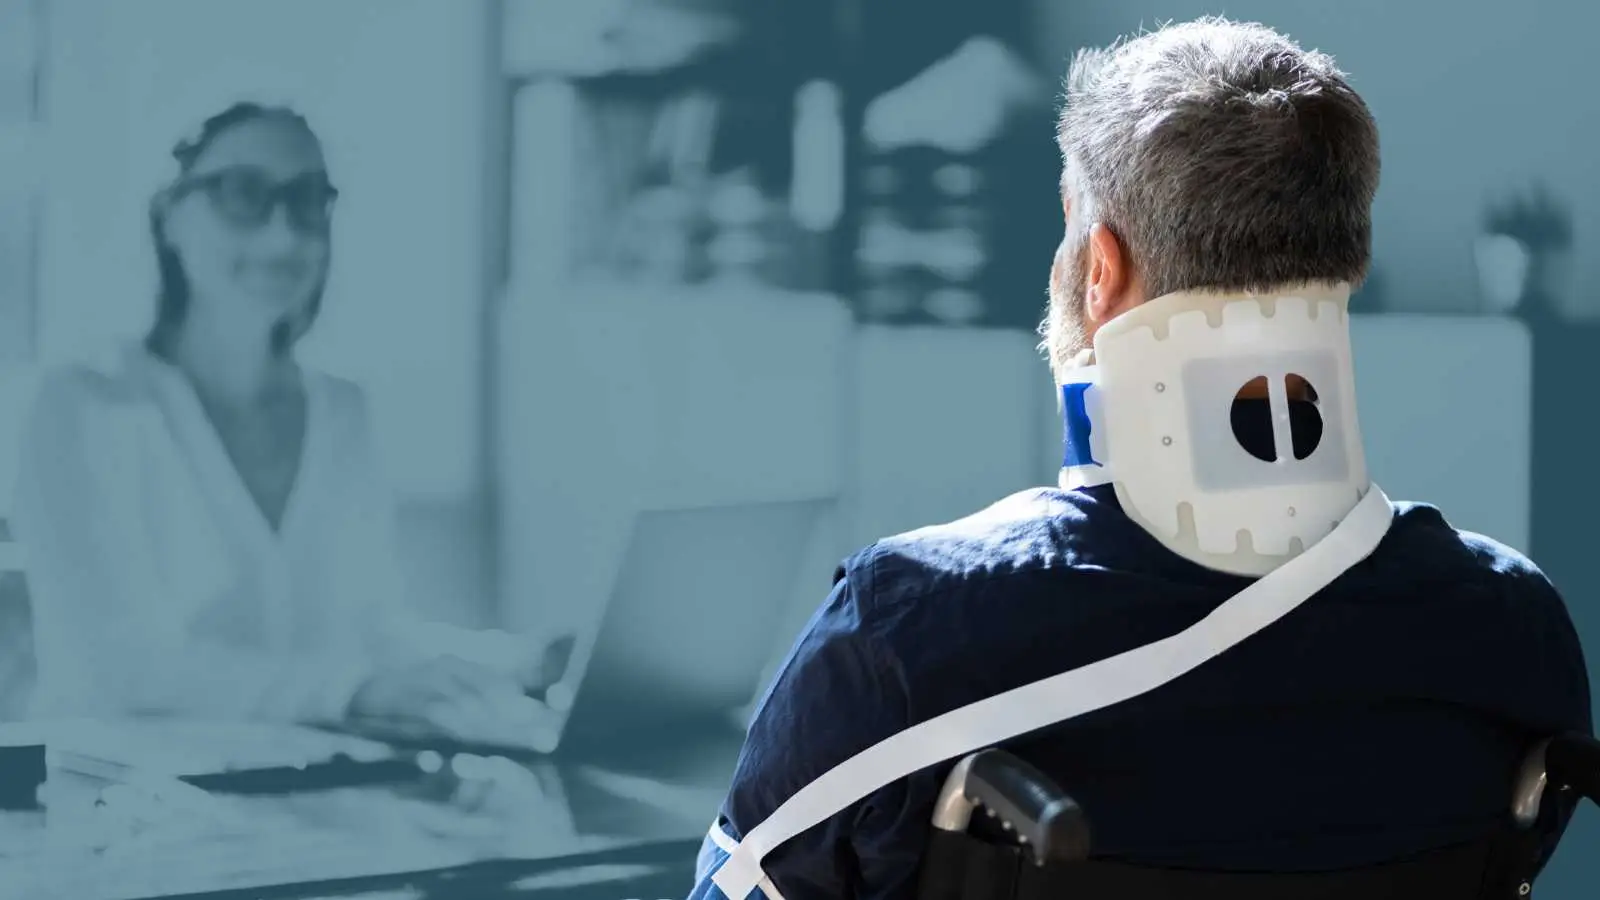 Attorney consulting a client in a neck brace and wheelchair, symbolizing personal injury legal services.